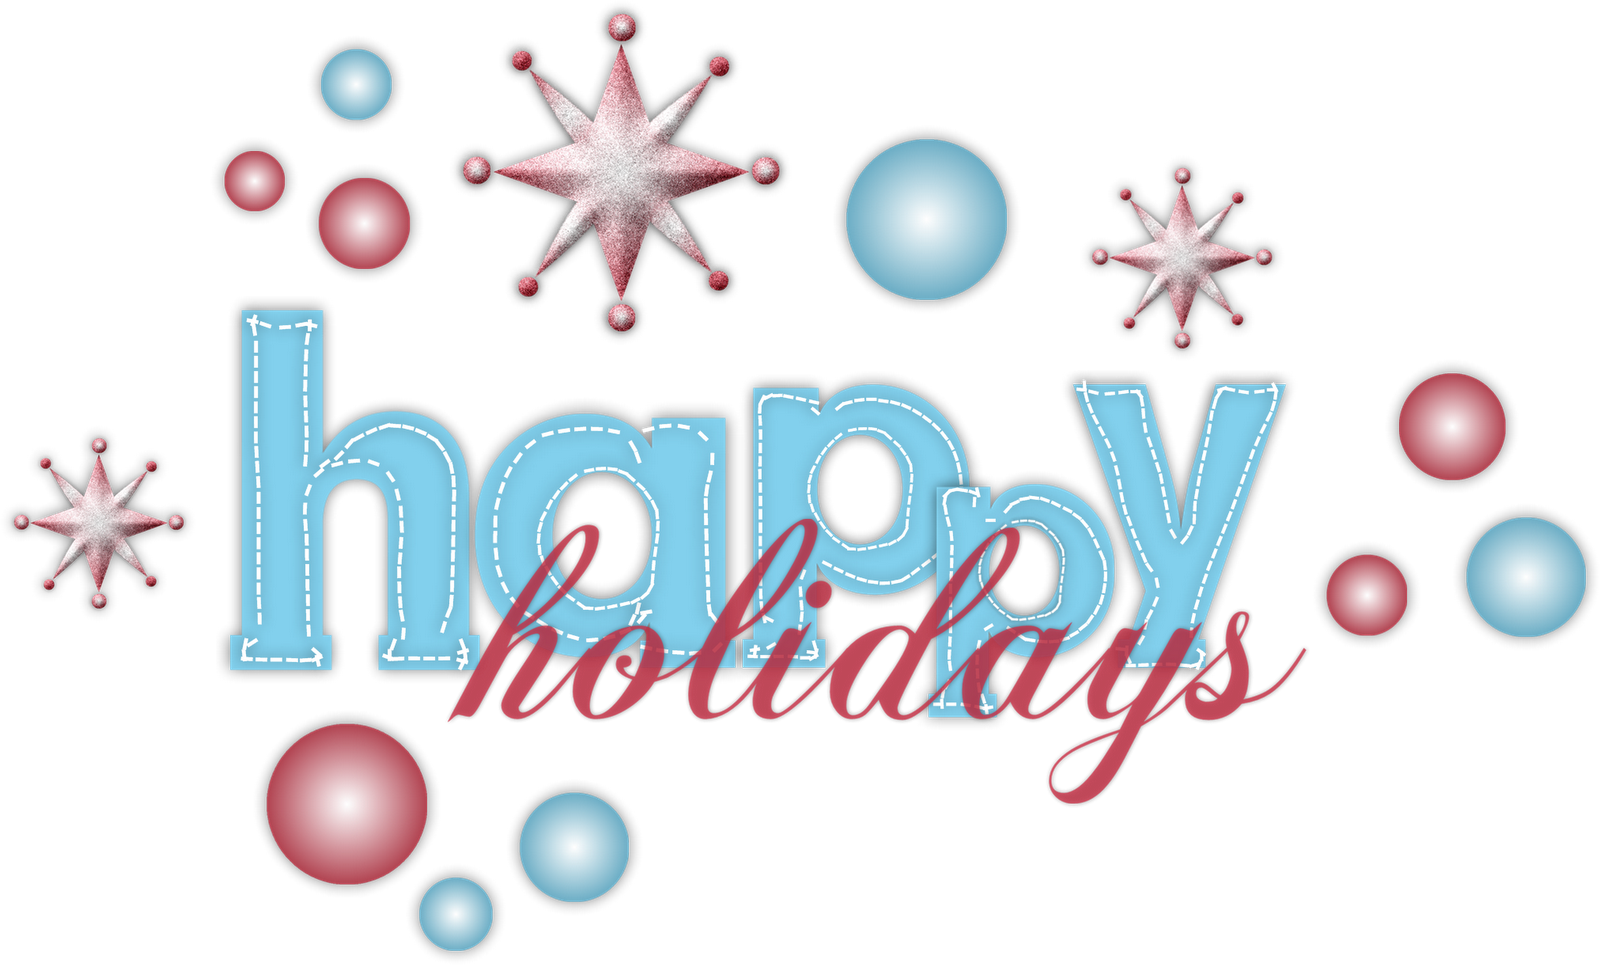 free clipart images happy holidays - photo #22